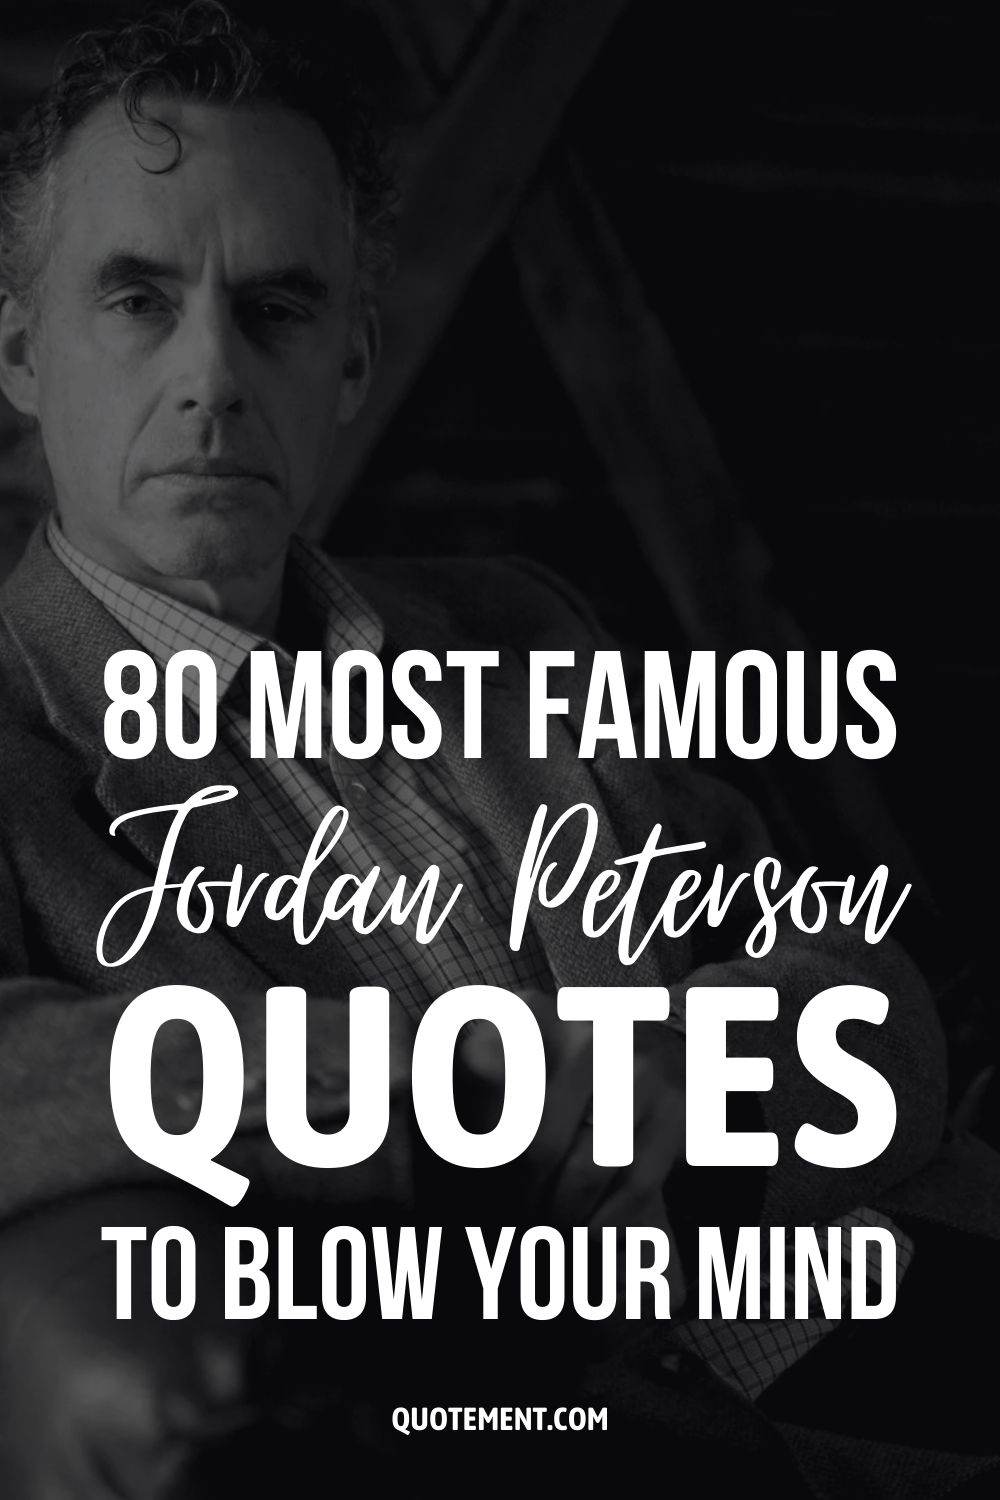 80 Most Famous Jordan Peterson Quotes To Blow Your Mind